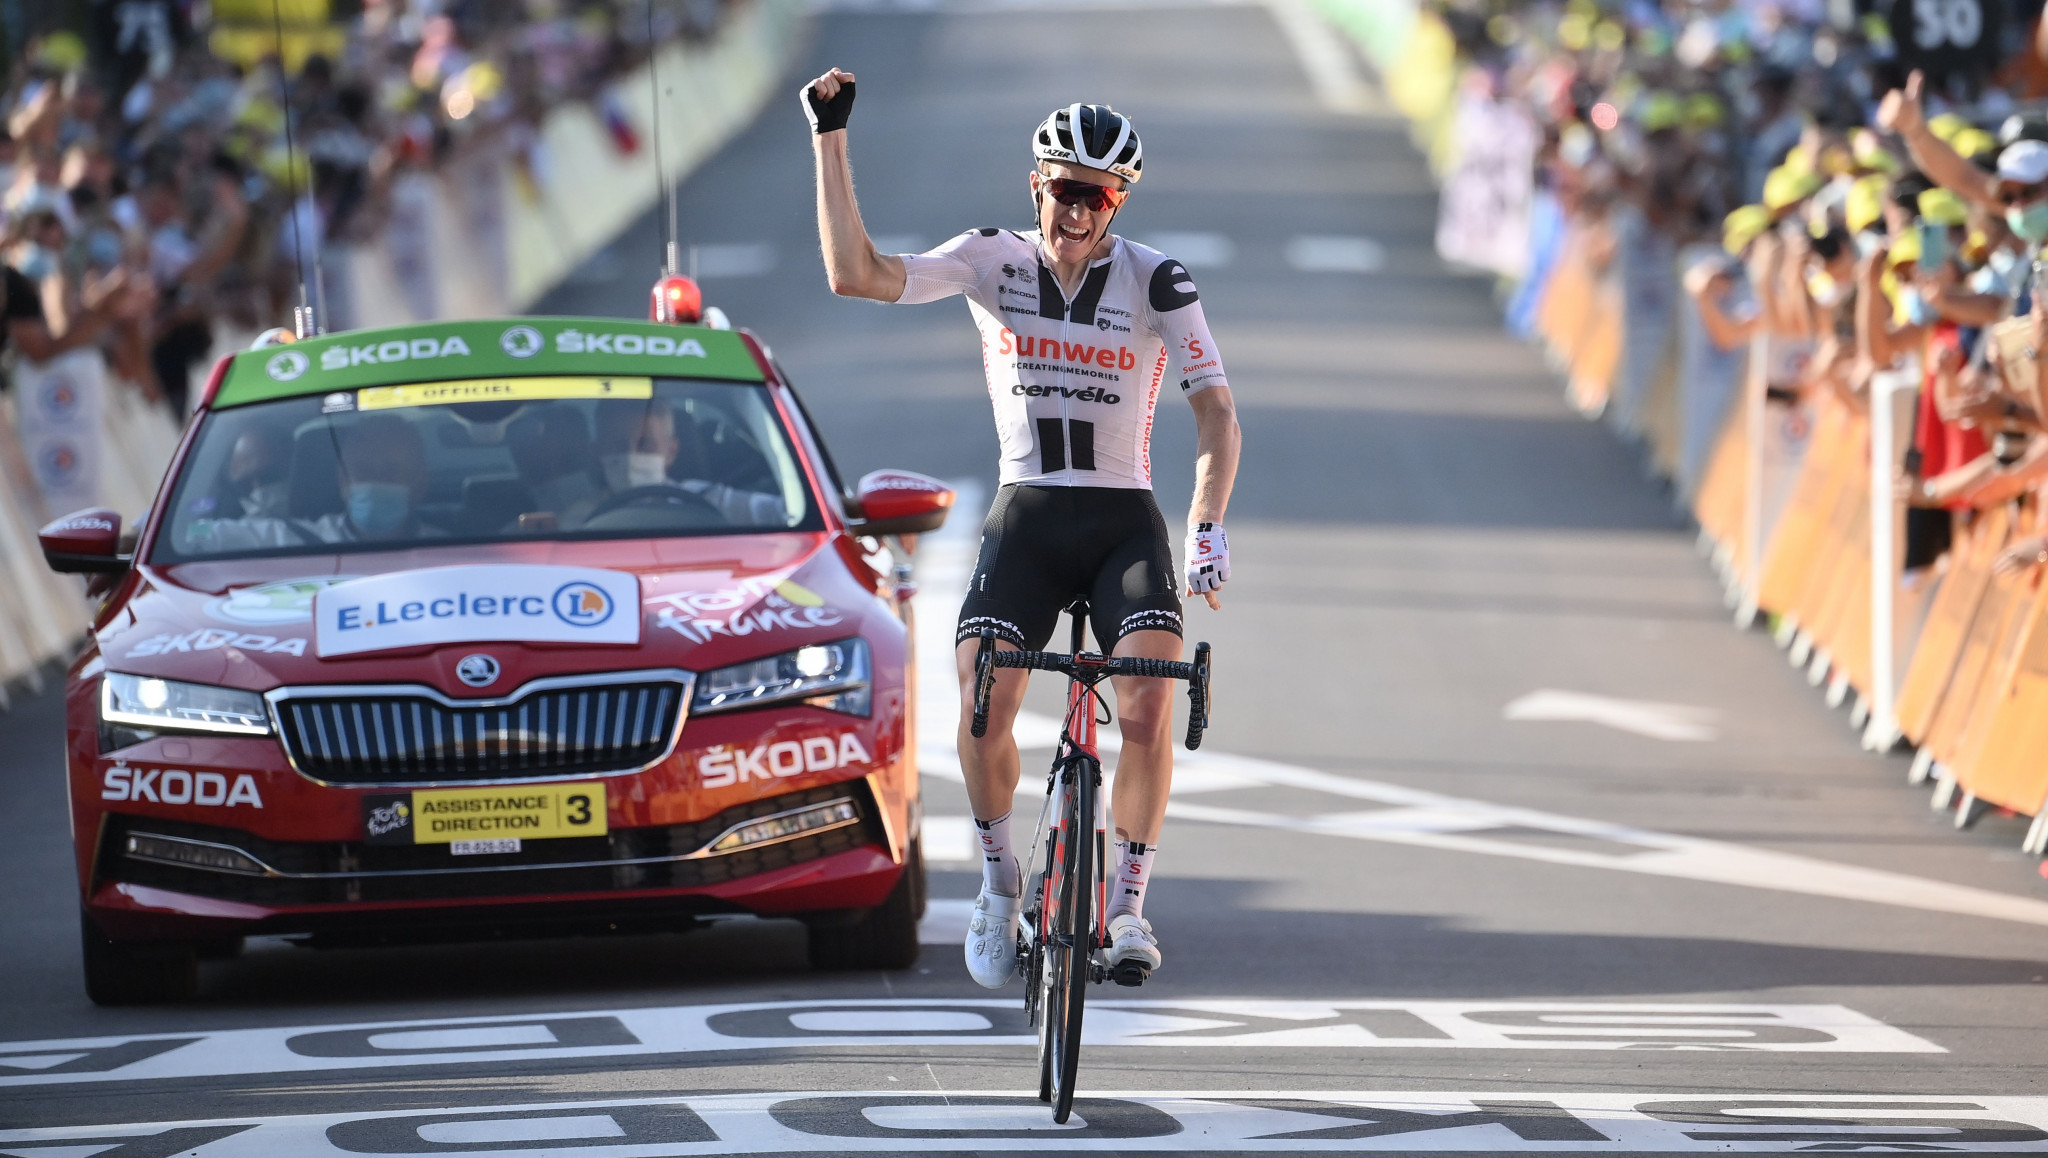 Andersen escapes again to secure second Tour de France stage victory